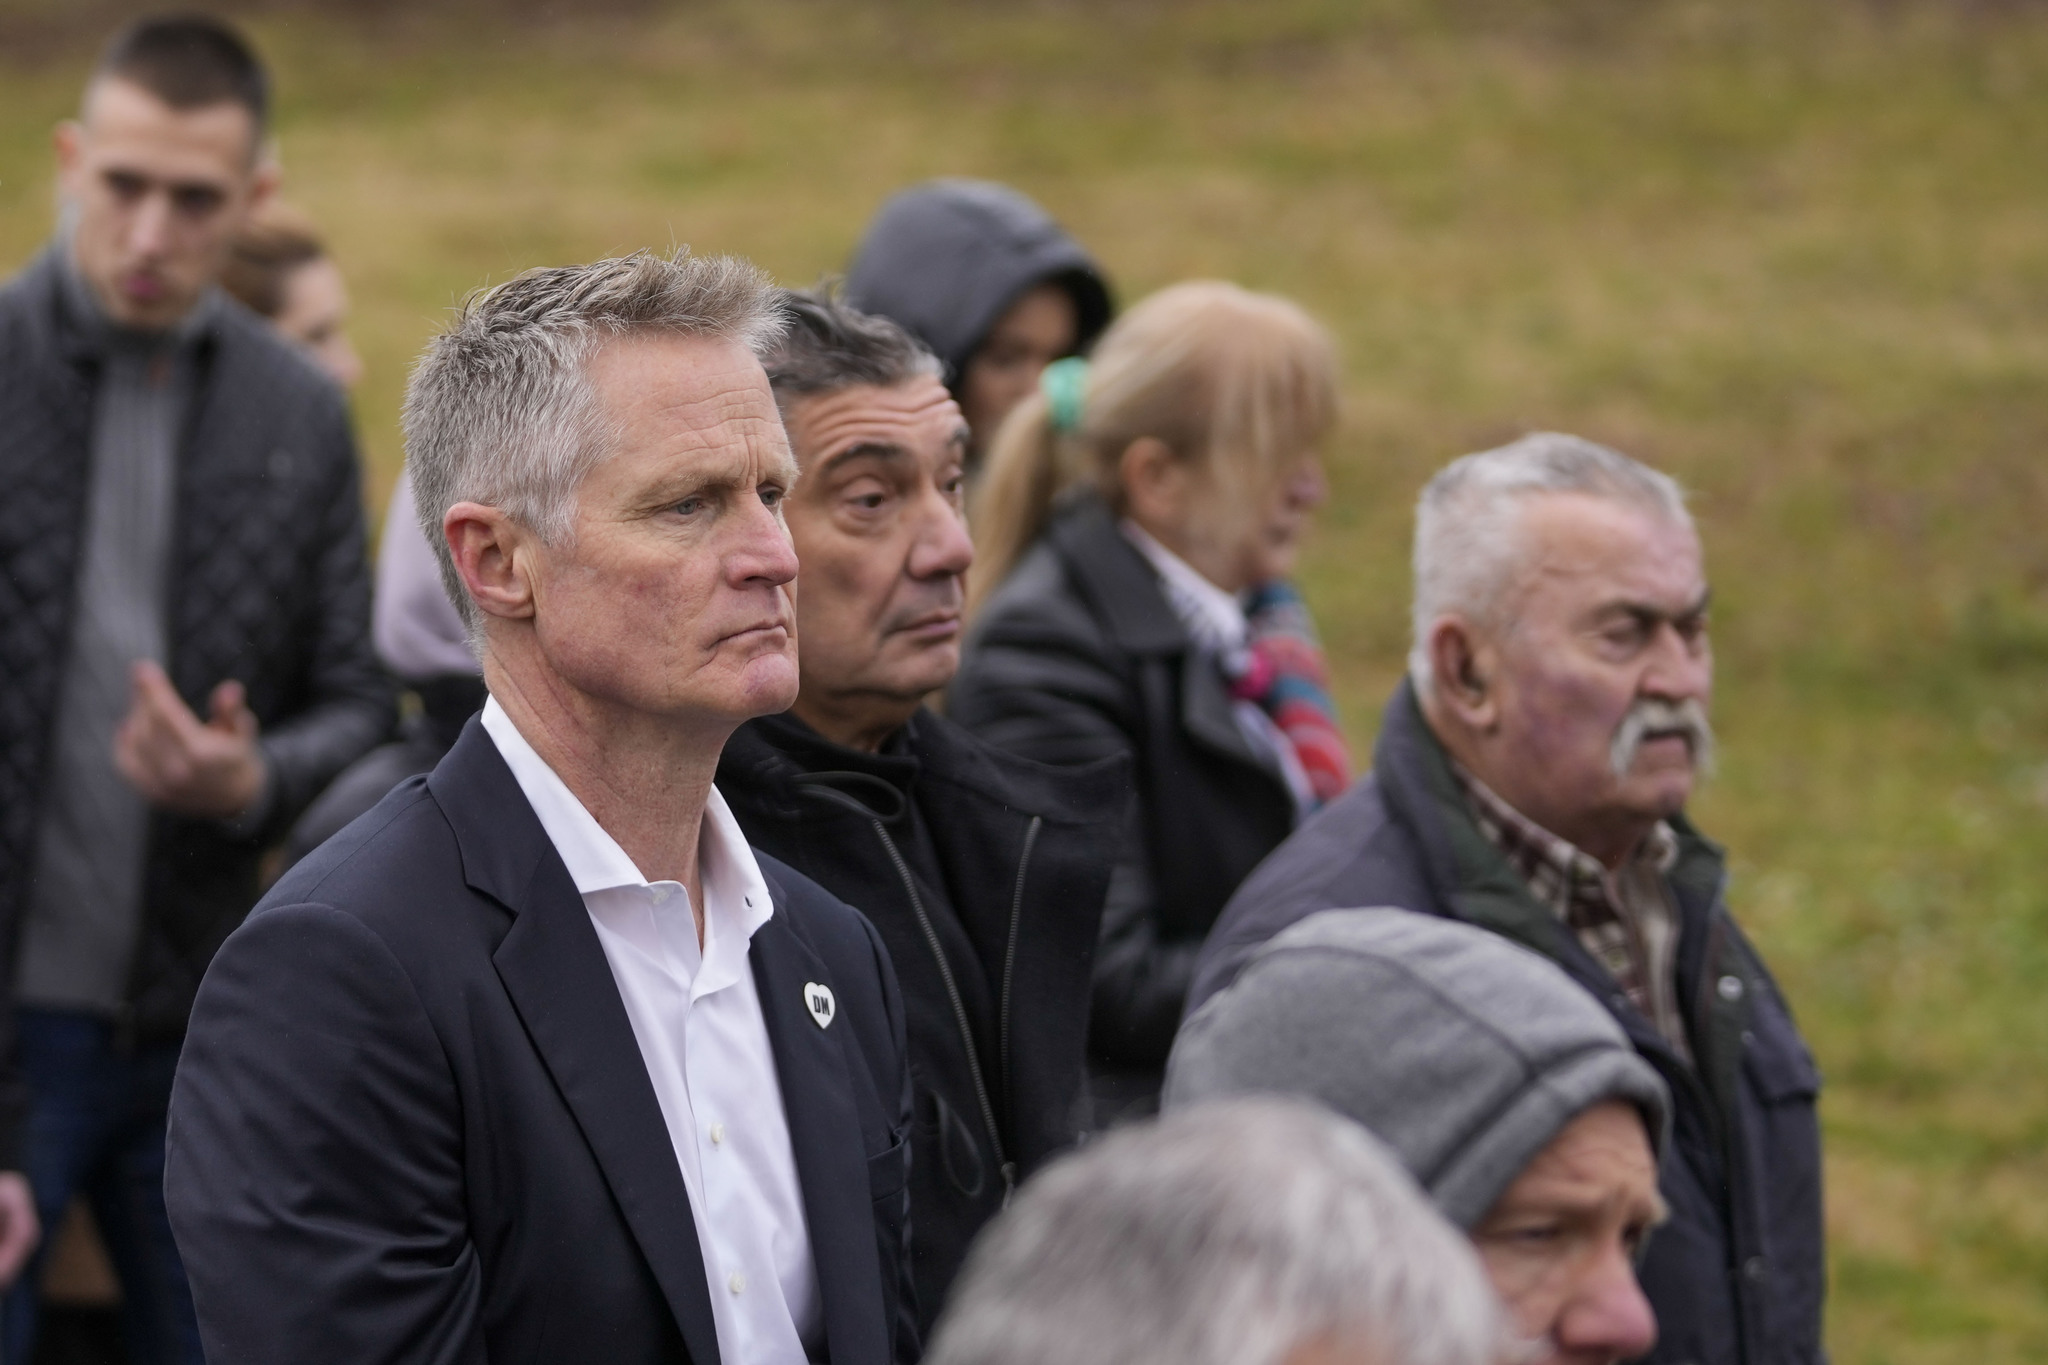 Golden State Warriors head coach Steve Kerr attends the funeral of the late Dejan Milojevic